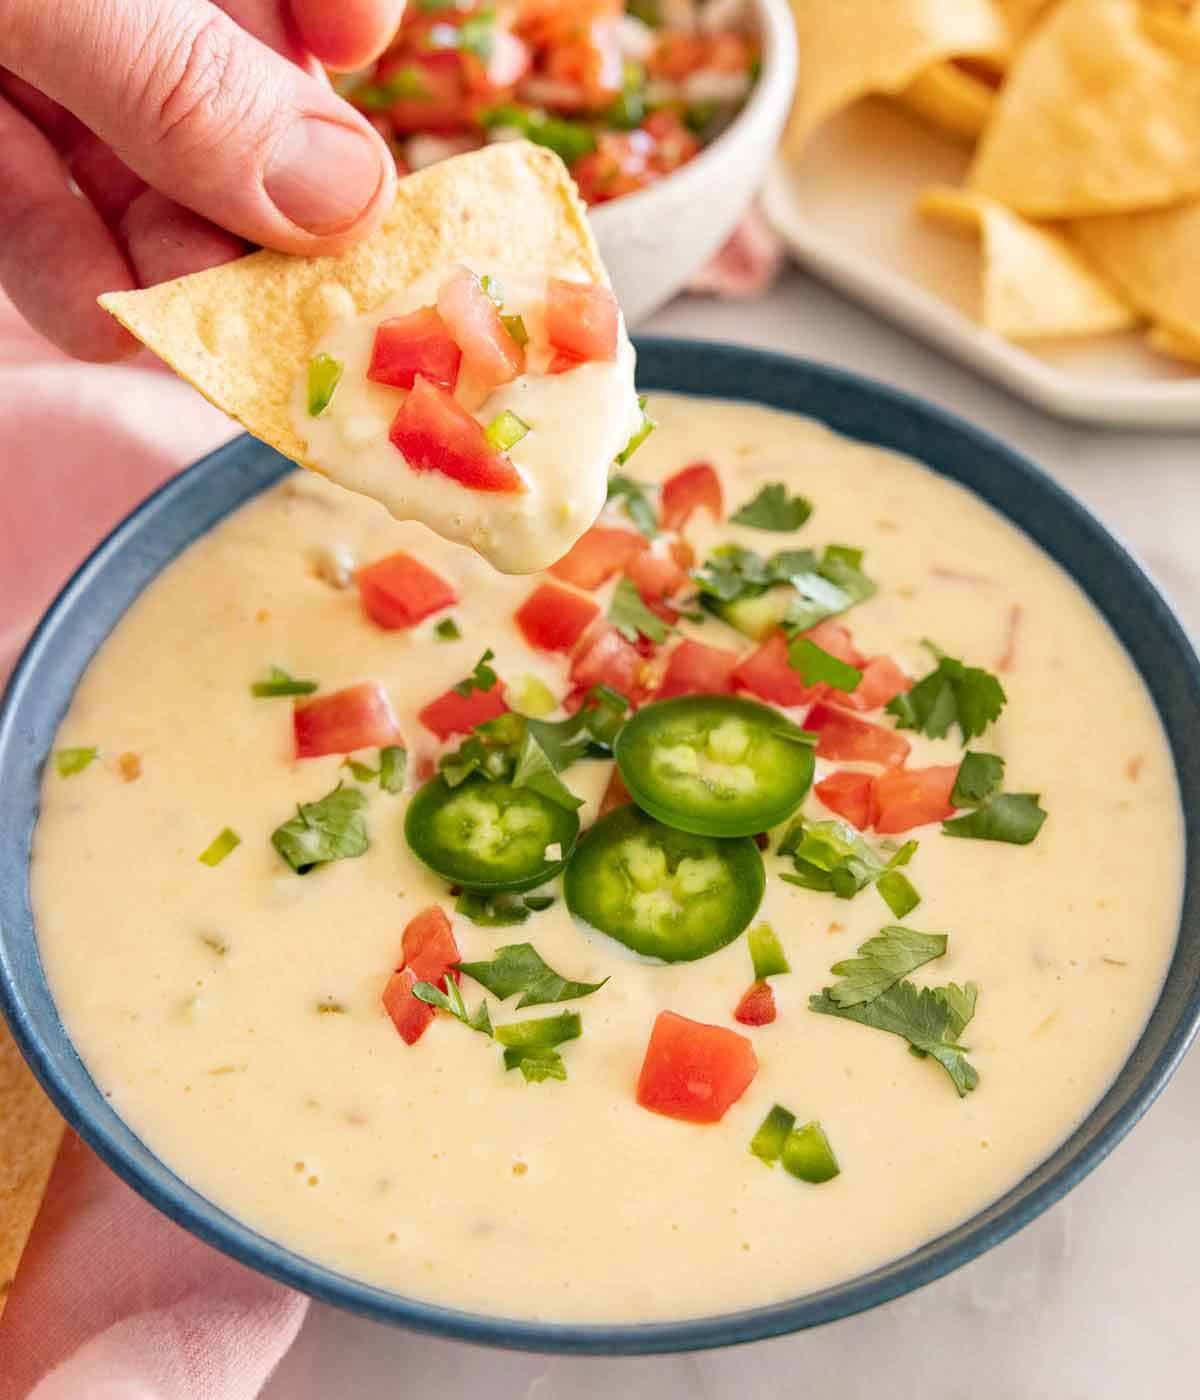 A chip with queso dip on it in front of a bowl of dip.